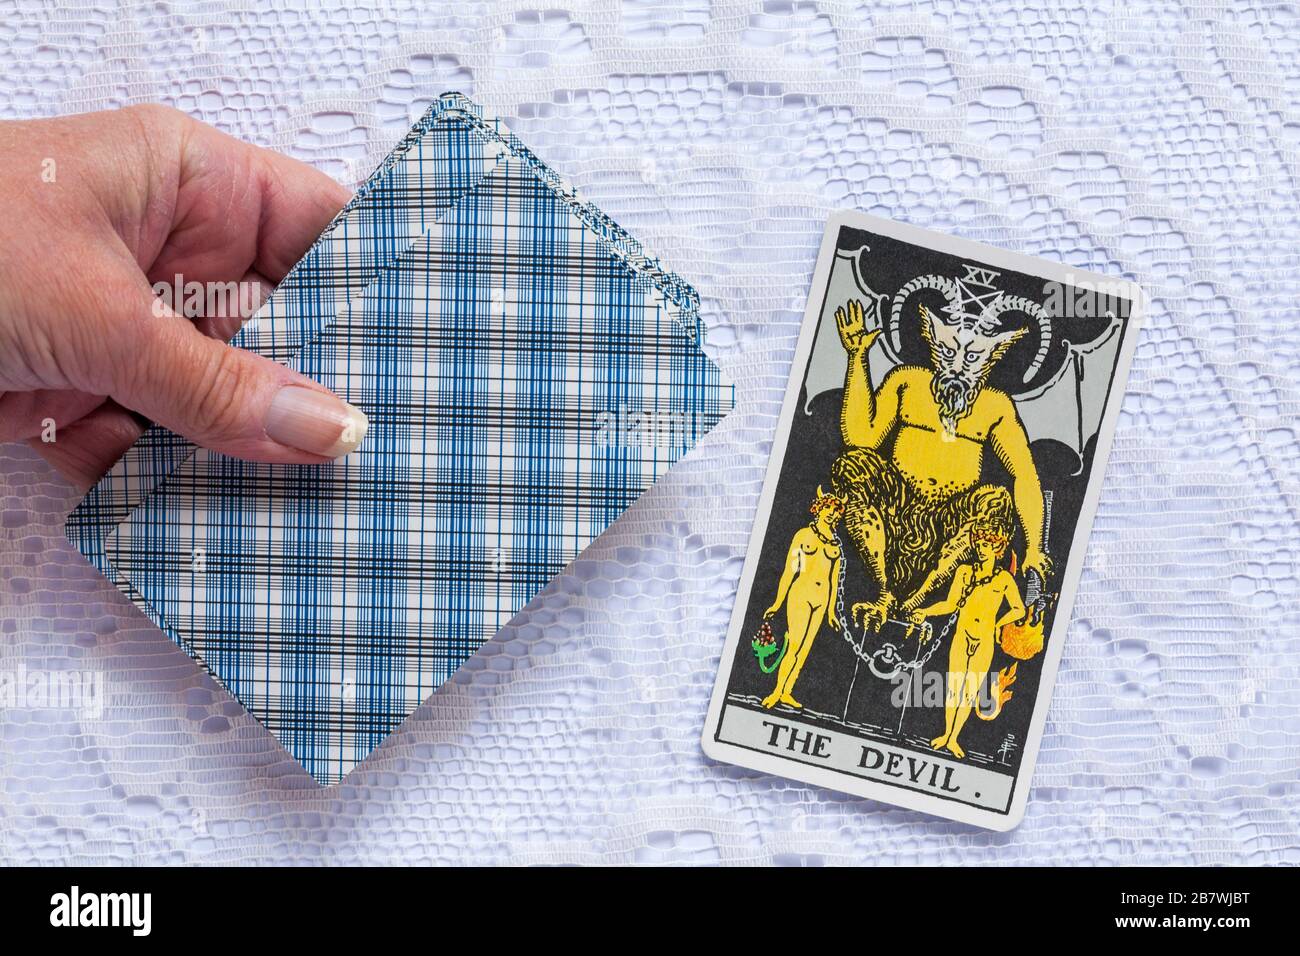 hand holding Rider Tarot Cards designed by Pamela Colman Smith under supervision of Arthur Edward Waite with The Devil tarot card upturned Stock Photo